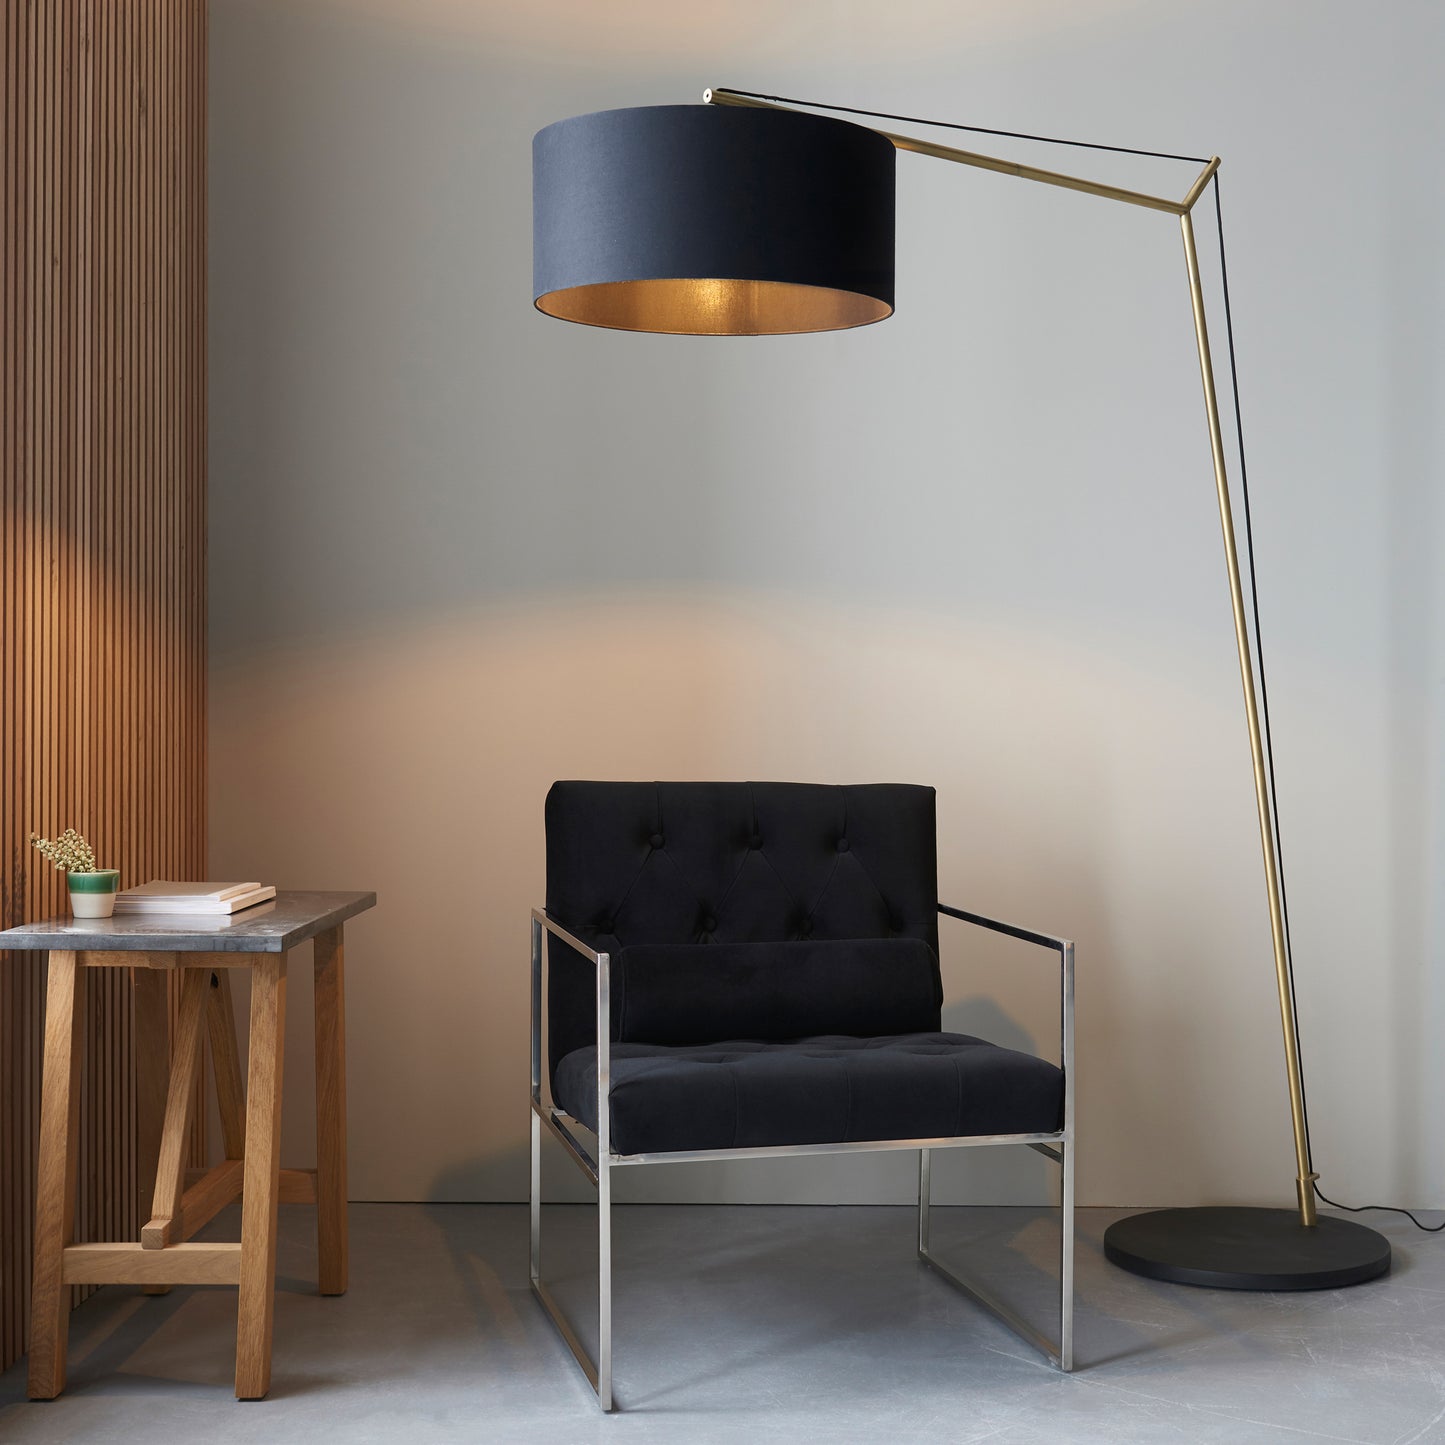 A black chair paired with an interior decor Kikiathome.co.uk Buckland Floor Lamp Antique Brass.